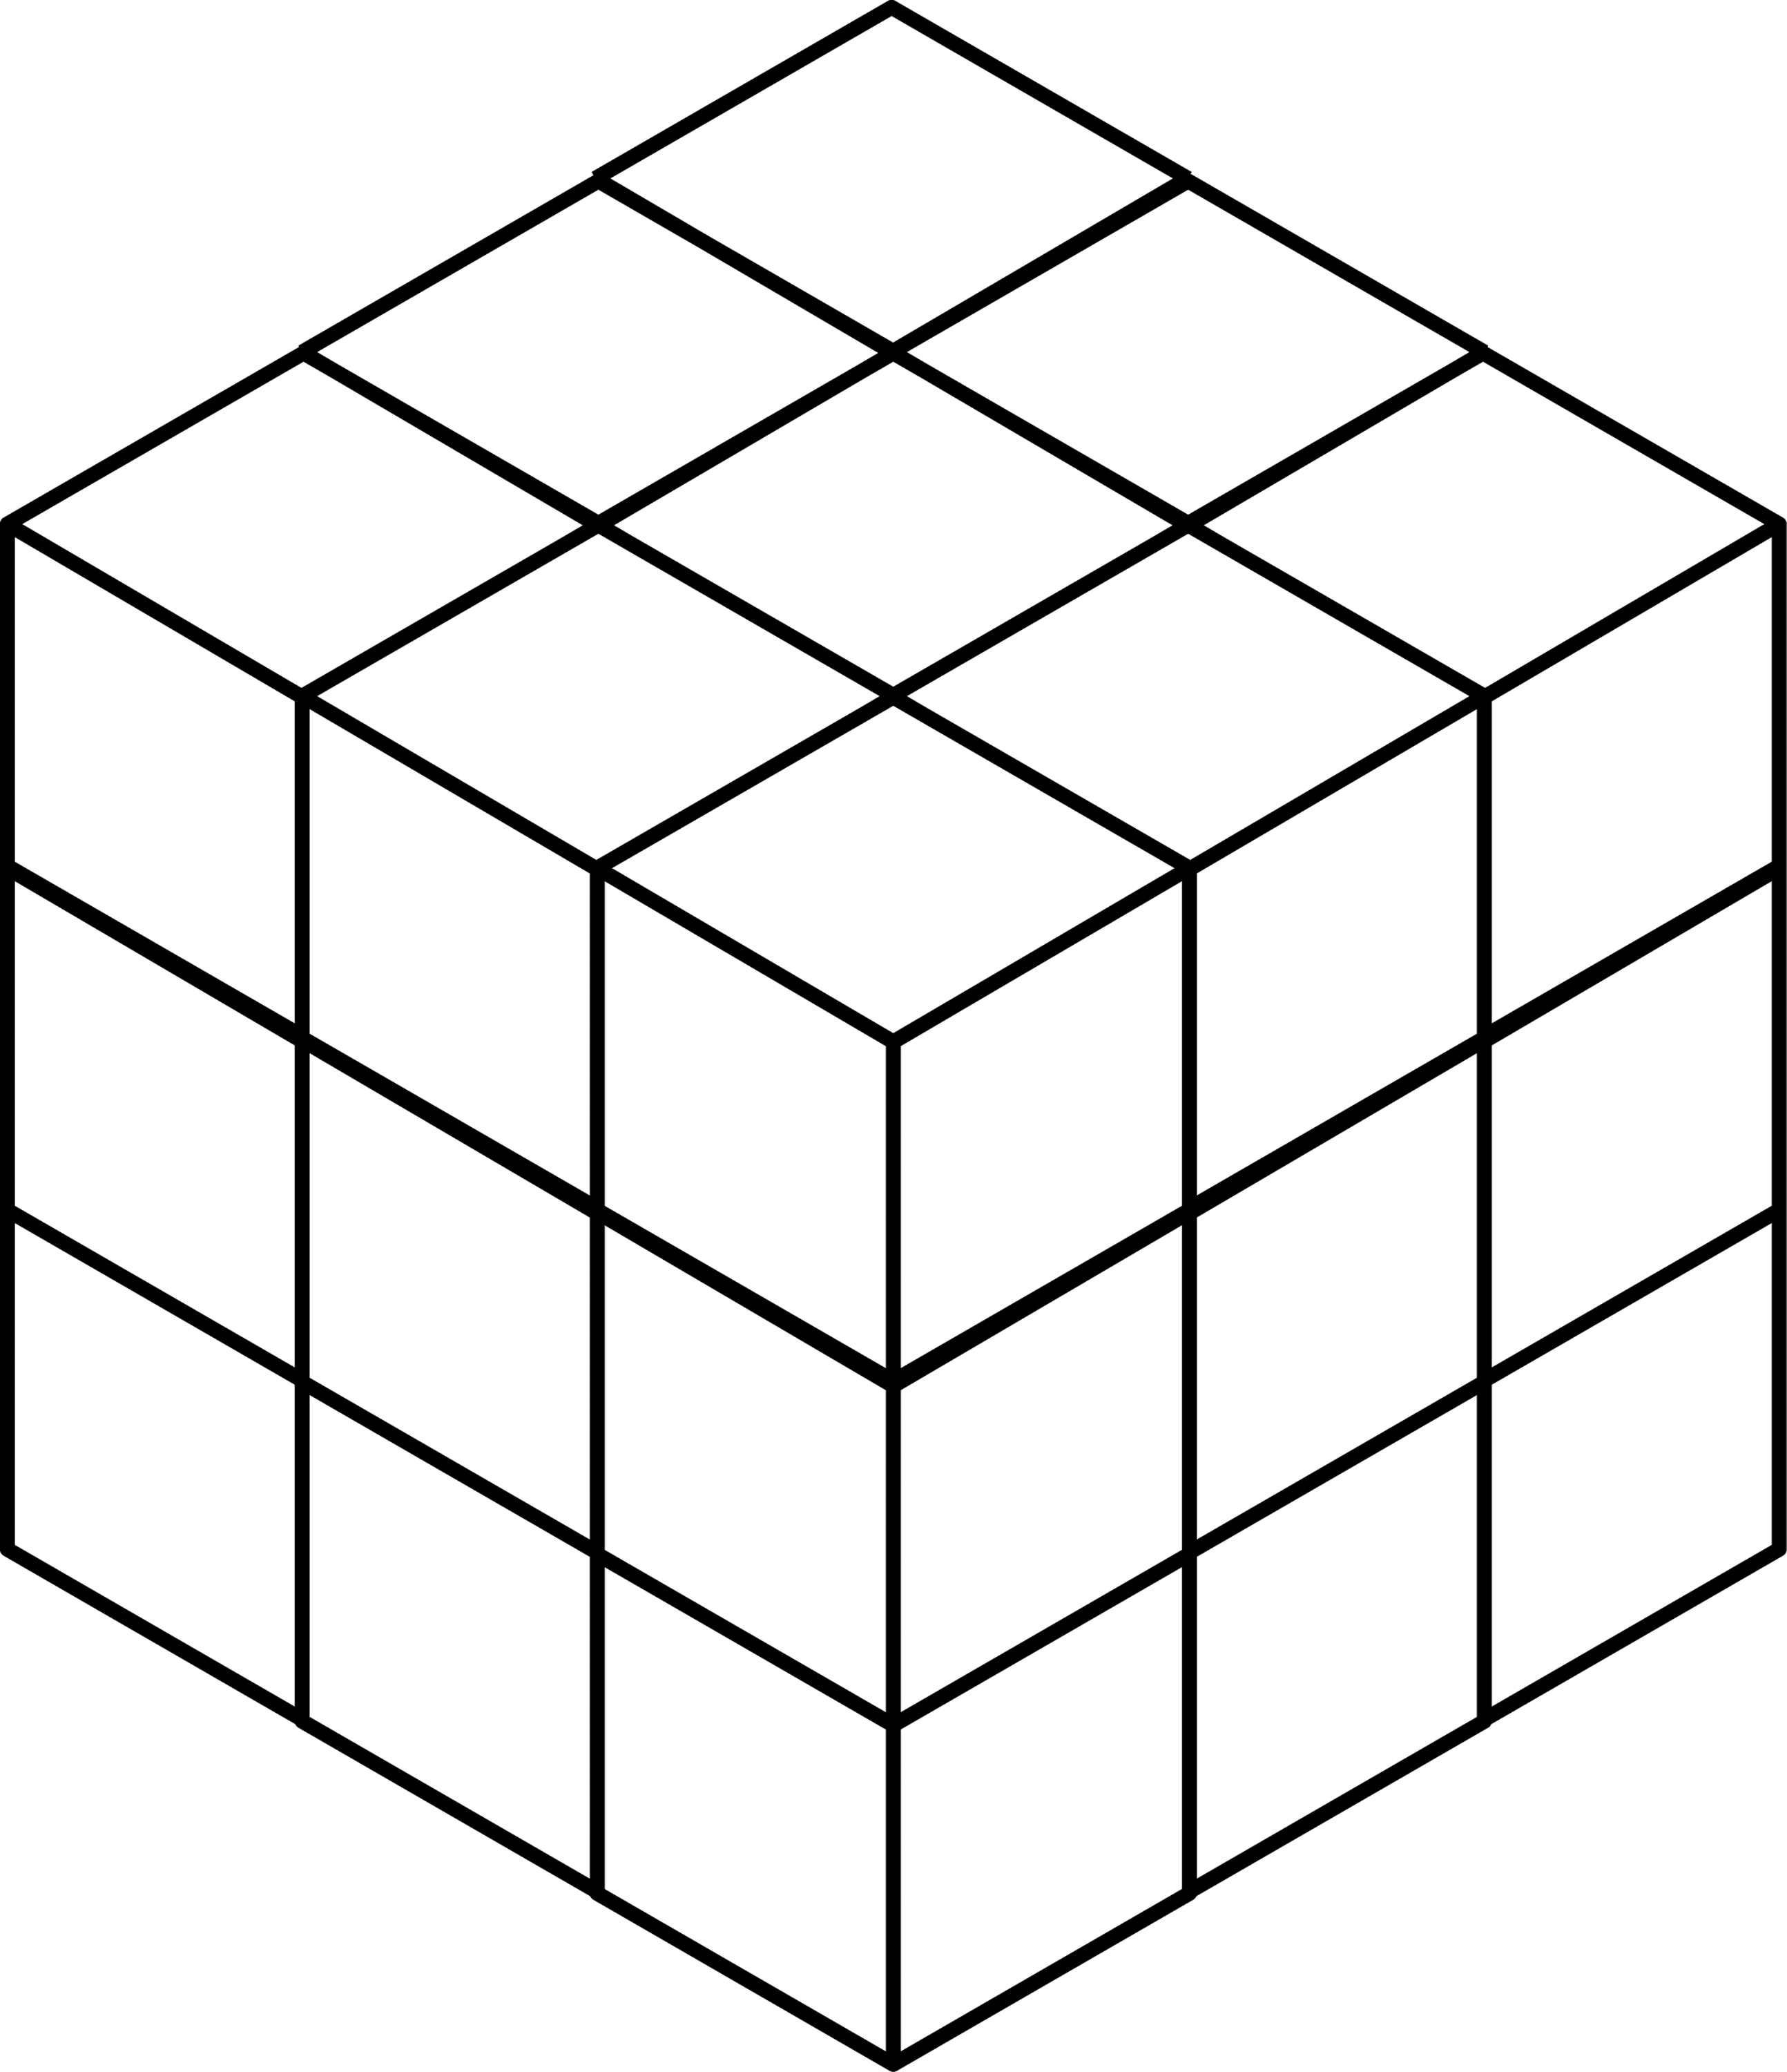 27 Stacked Congruent Cubes | ClipArt ETC